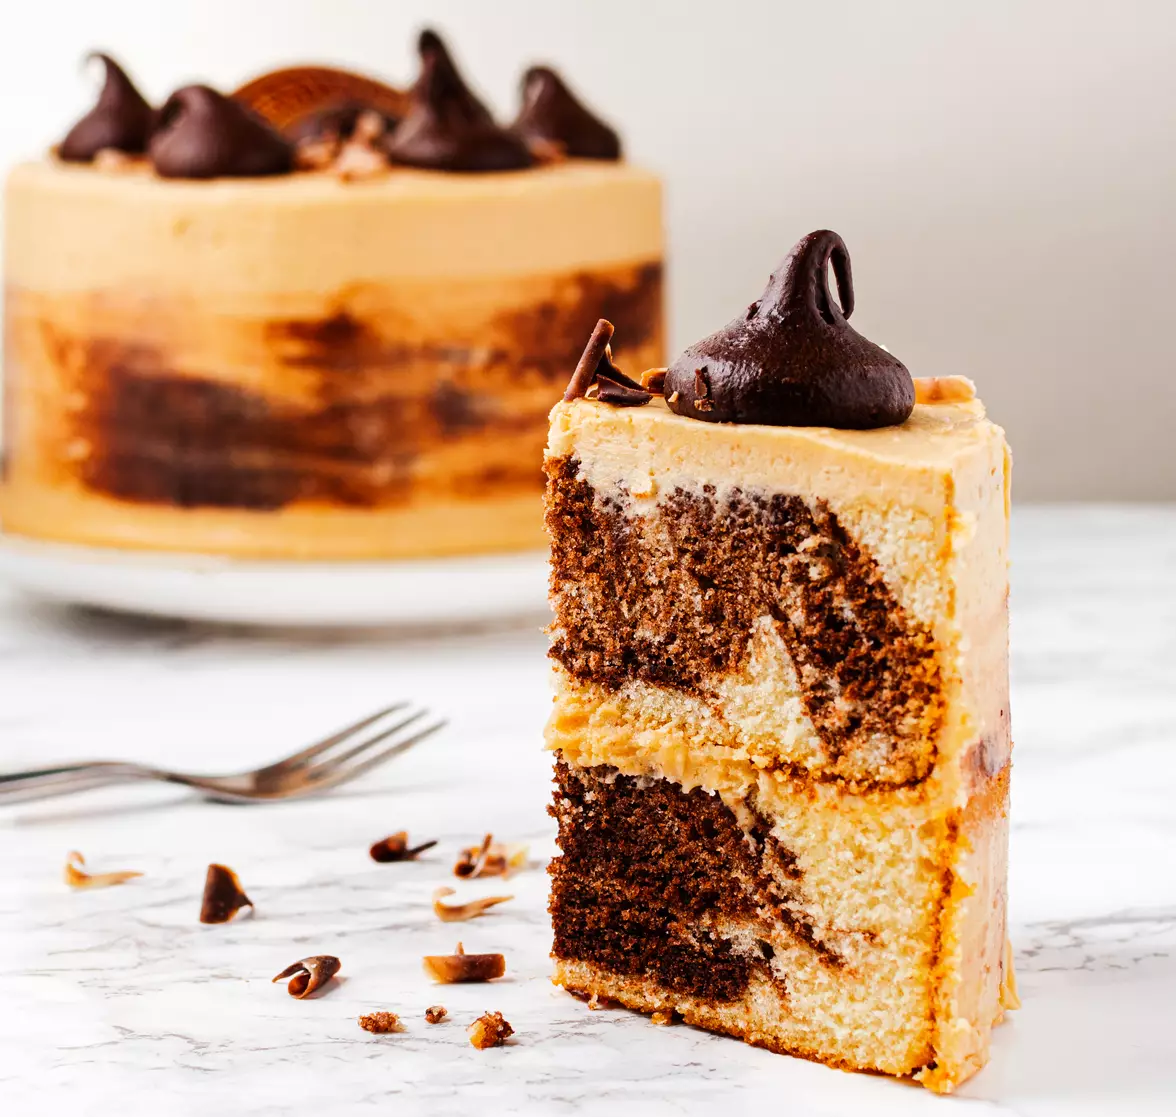 Baileys' new marble-effect cake lands in stores this week (